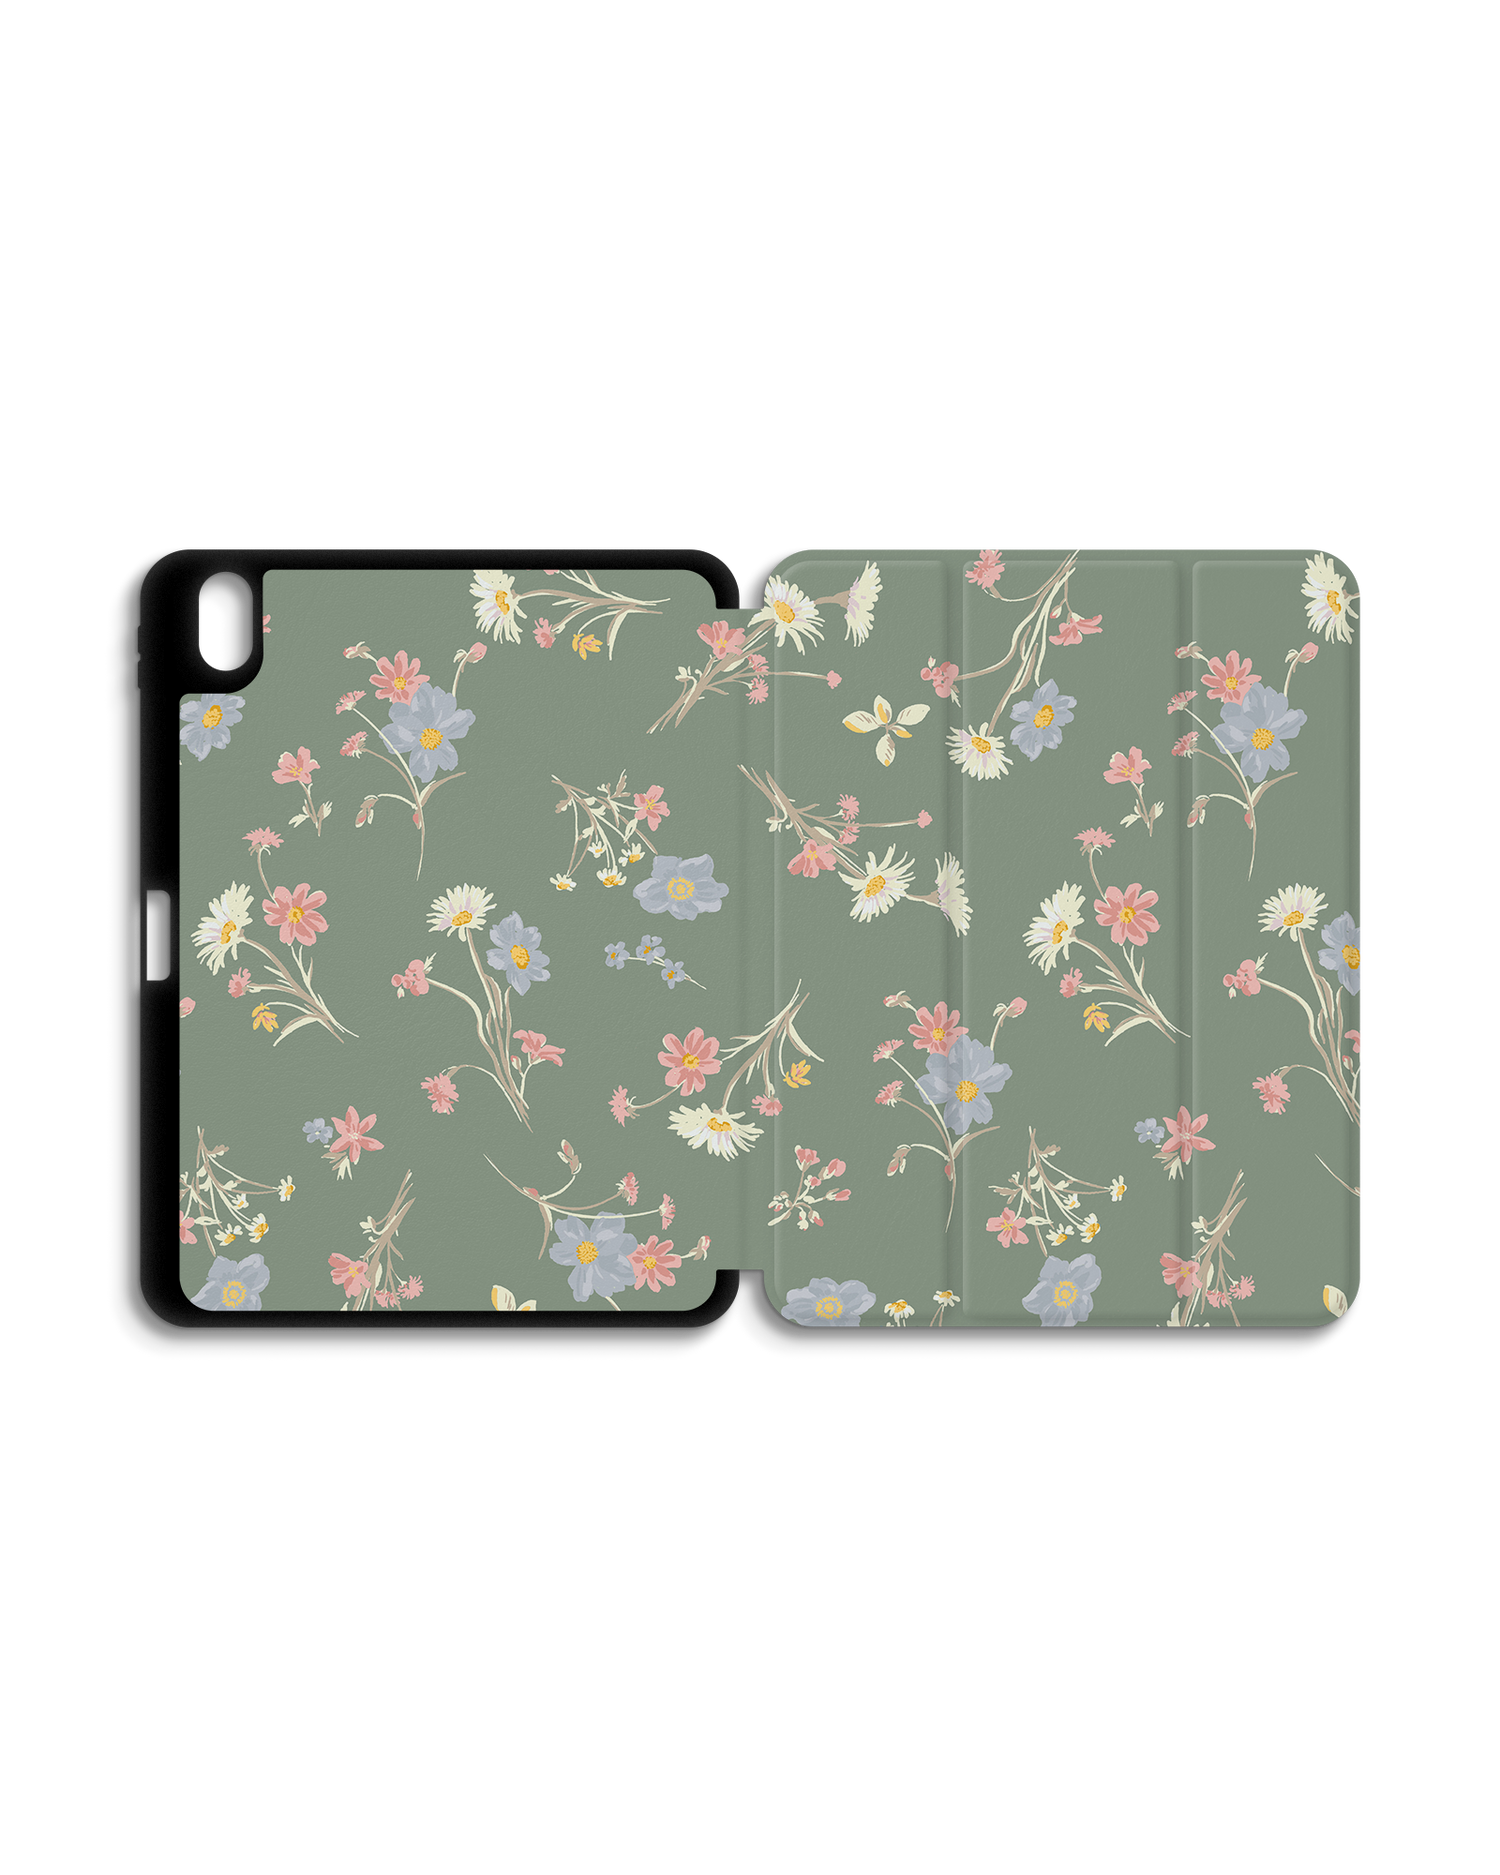 Wild Flower Sprigs iPad Case with Pencil Holder for Apple iPad (10th Generation): Opened exterior view